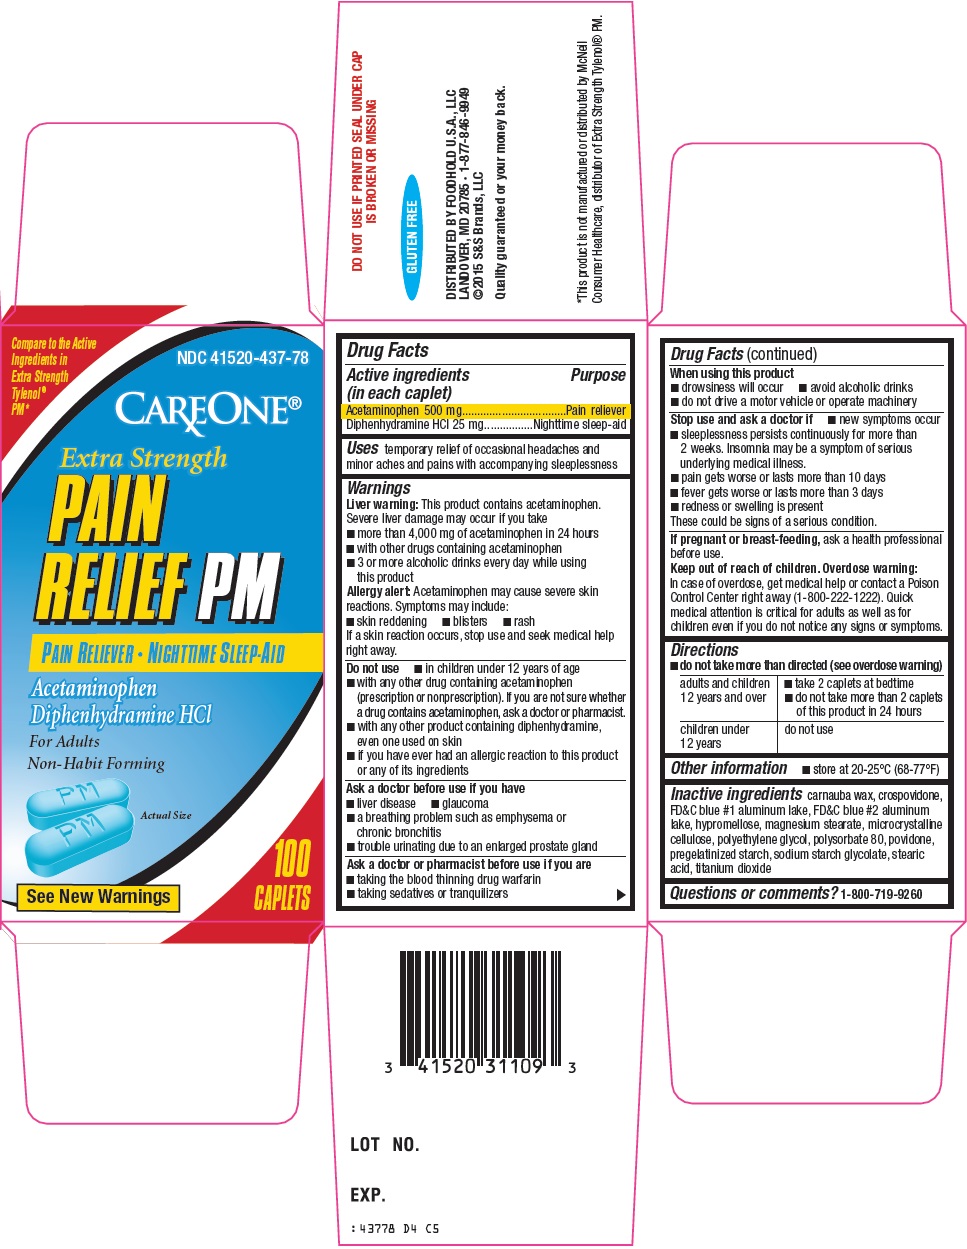 Is Care One Pain Relief Pm Extra Strength | Acetaminophen, Diphenhydramine Hcl Tablet safe while breastfeeding